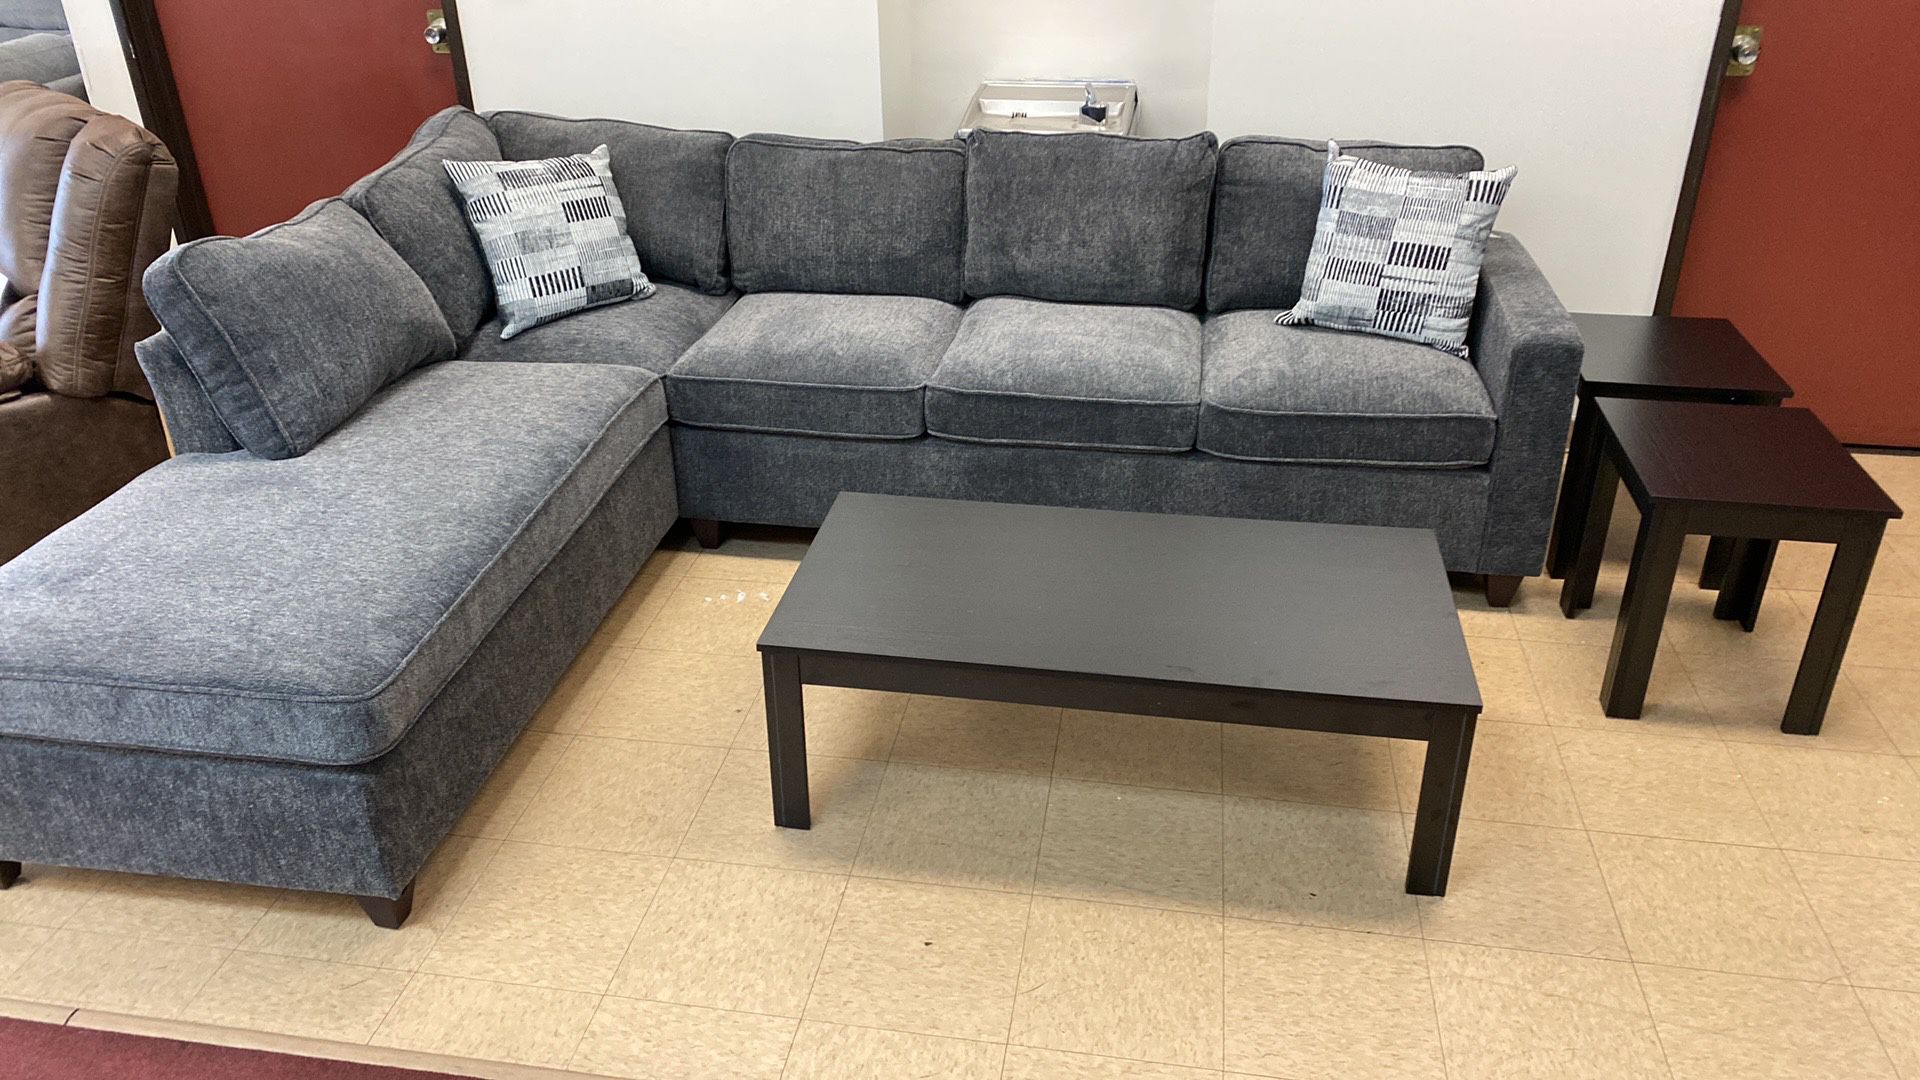 Brand New Sectional Sale For Only 10 Today!